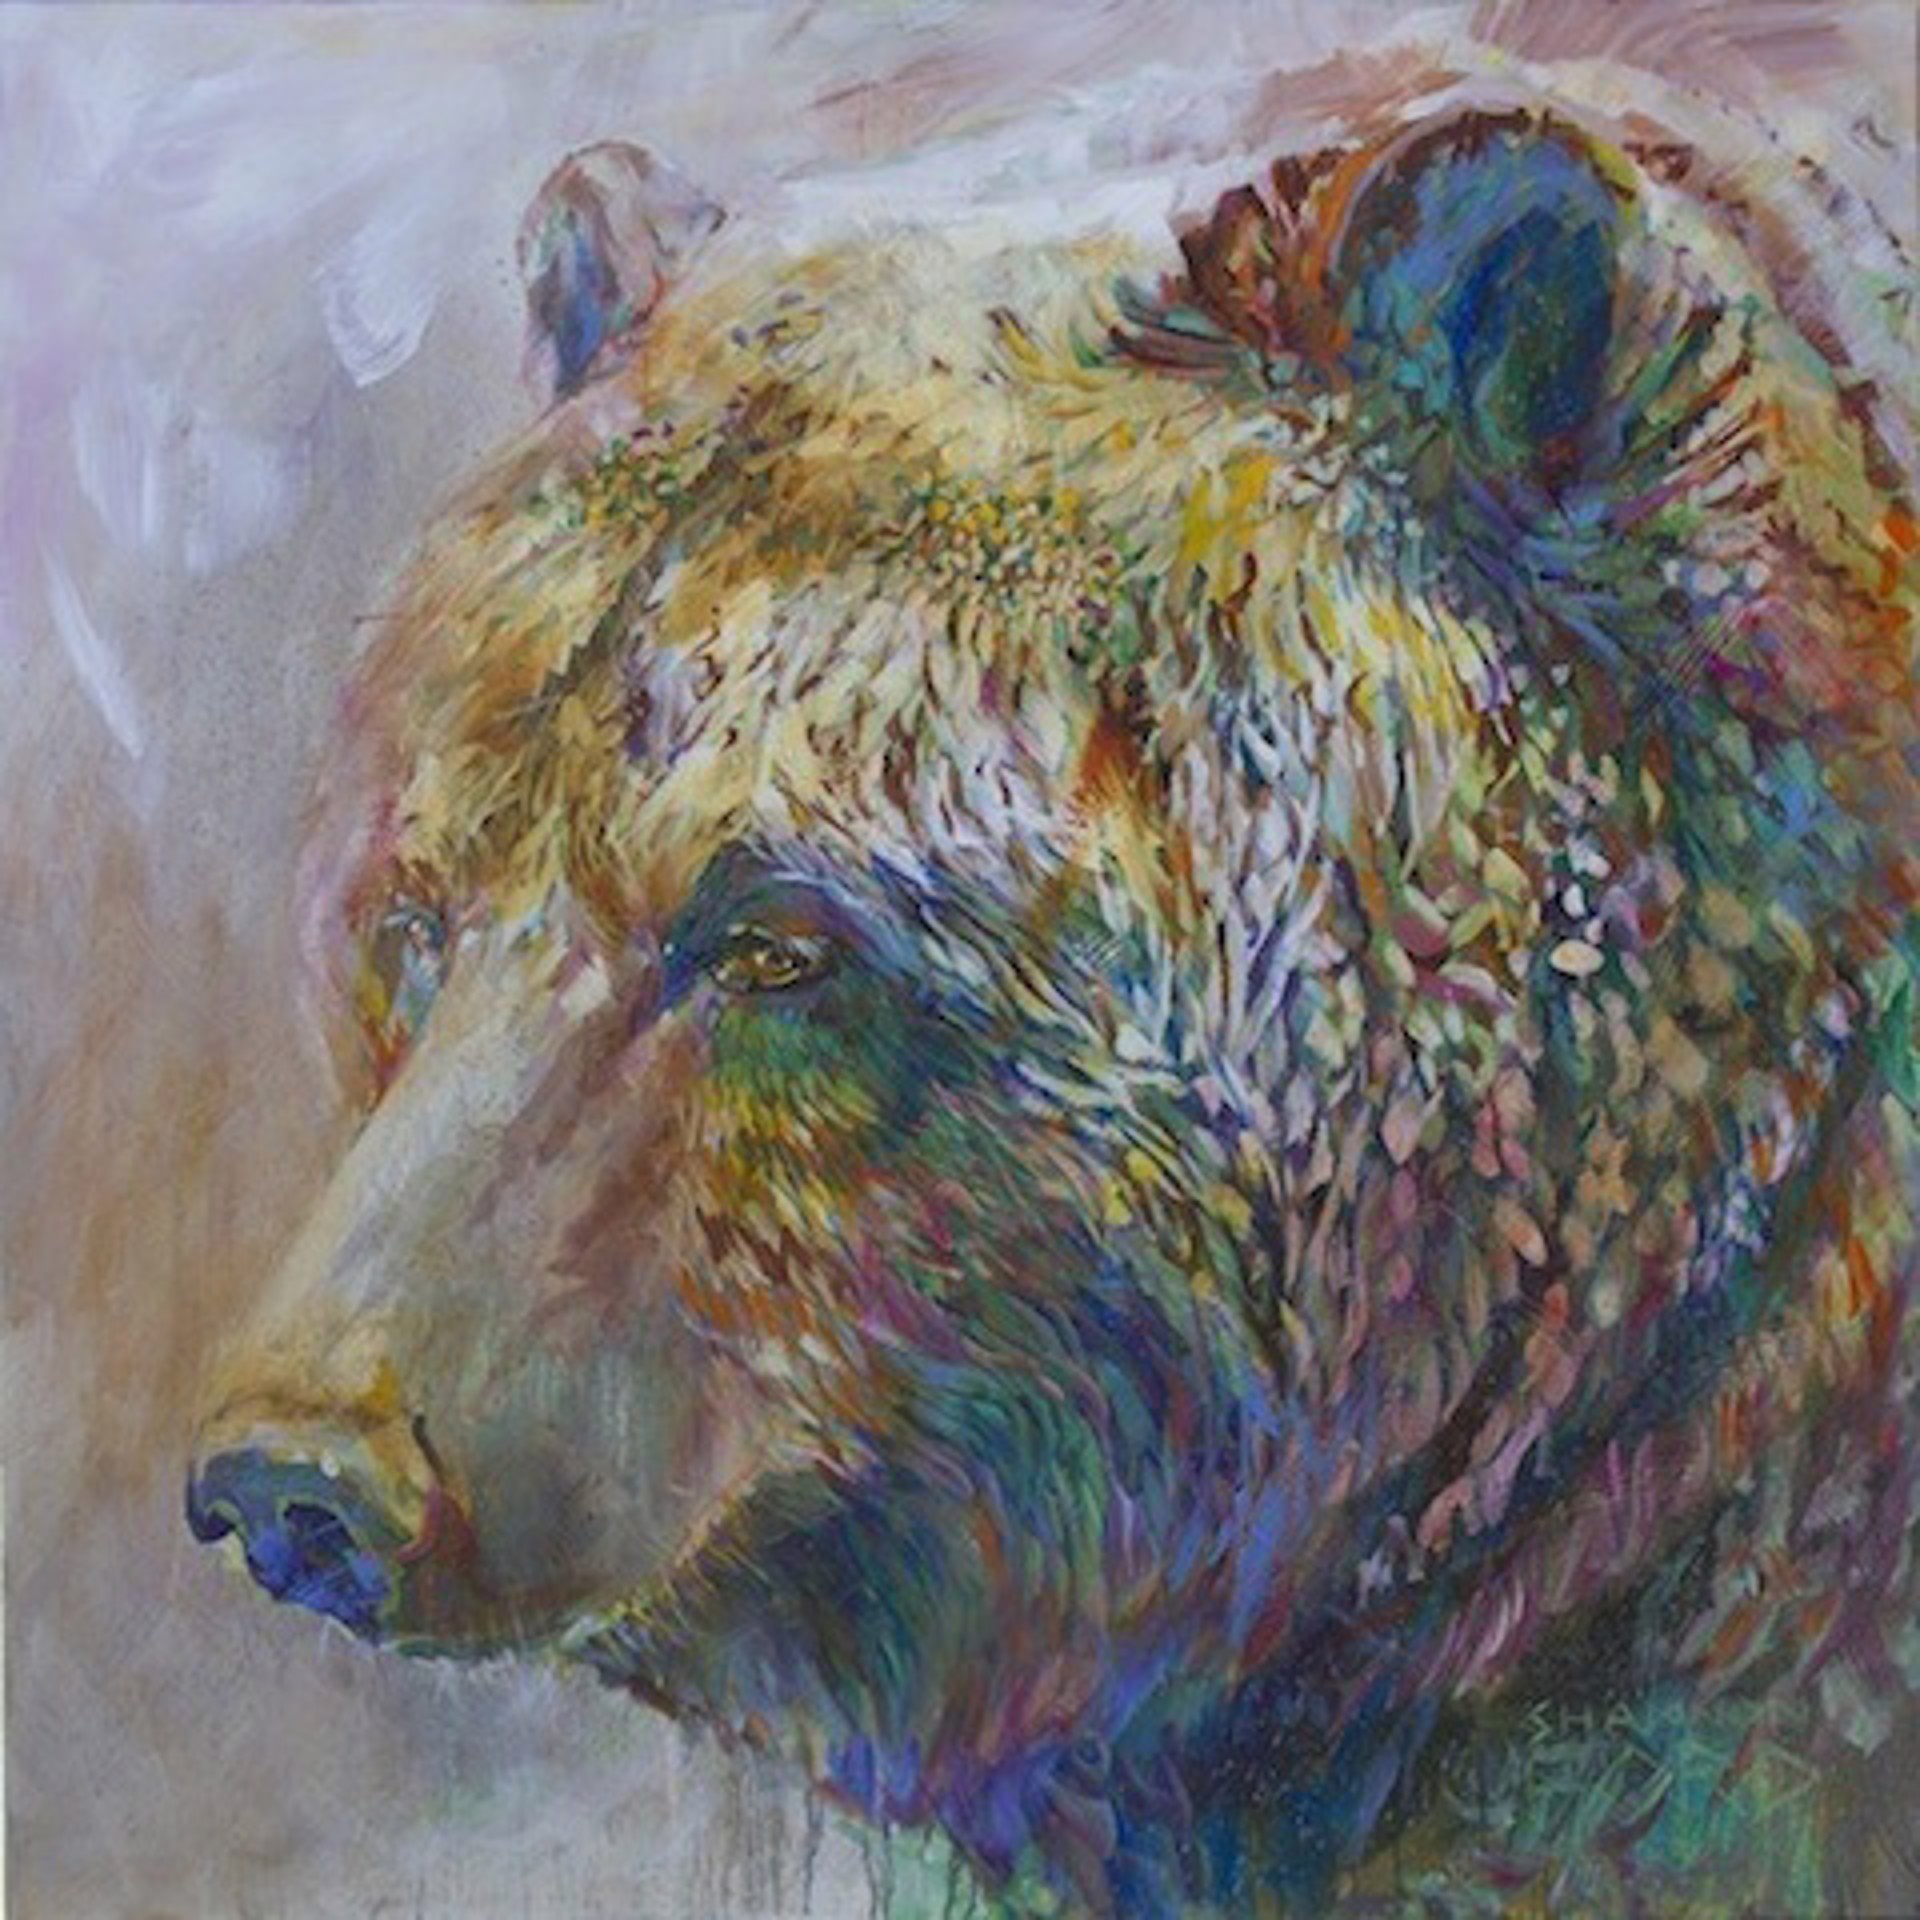 Grizzly in Pipestone #5 by Shannon Ford